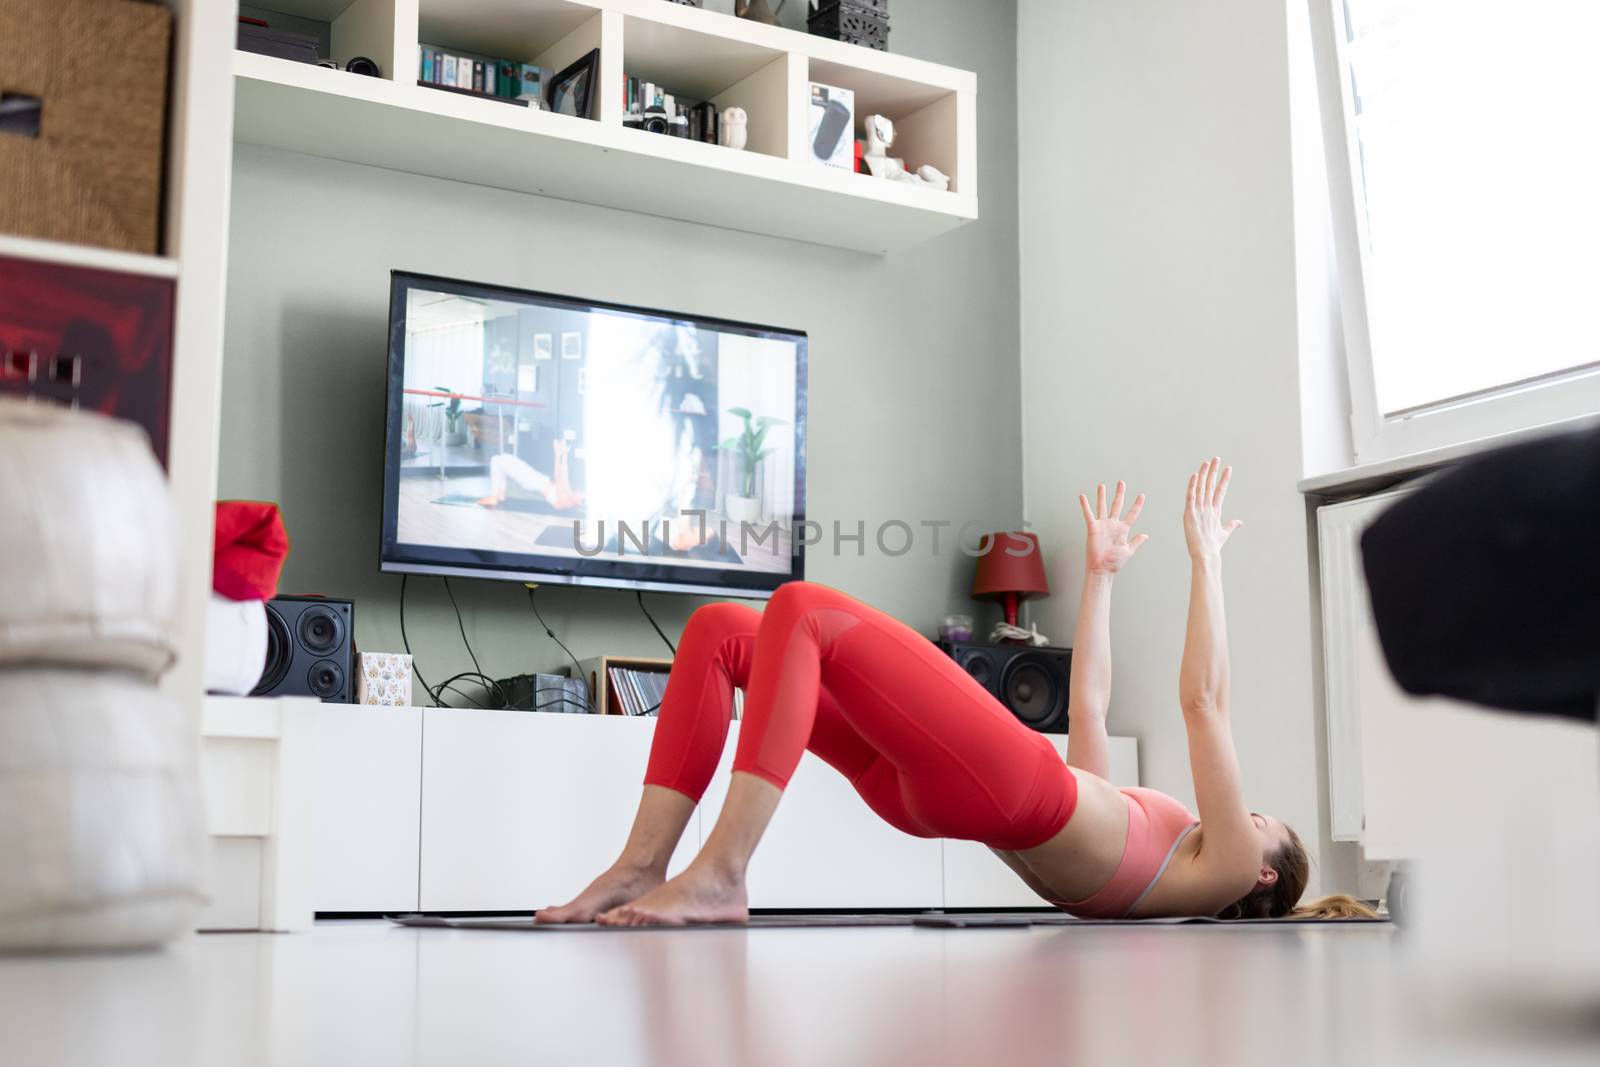 Attractive sporty woman working out at home, doing pilates exercise in front of television in small studio appartment. Social distancing. Stay healthy and stay at home during corona virus pandemic.